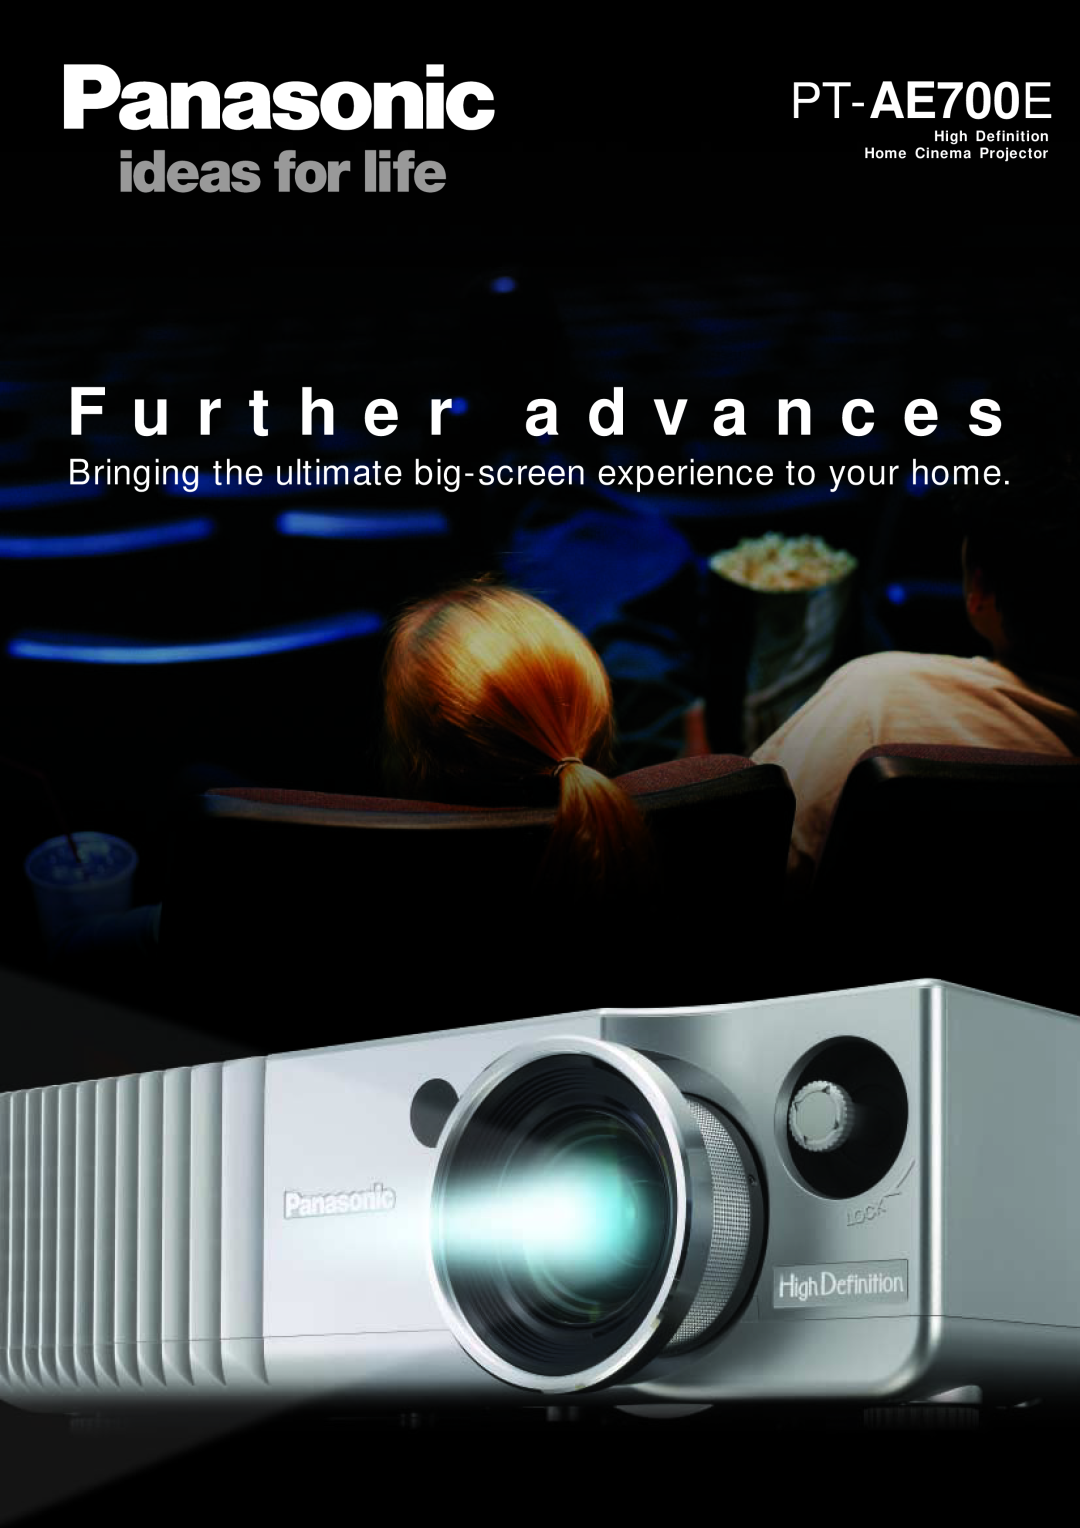 Panasonic PT-AE700E manual F u r t h e r a d v a n c e s, Bringing the ultimate big-screen experience to your home 